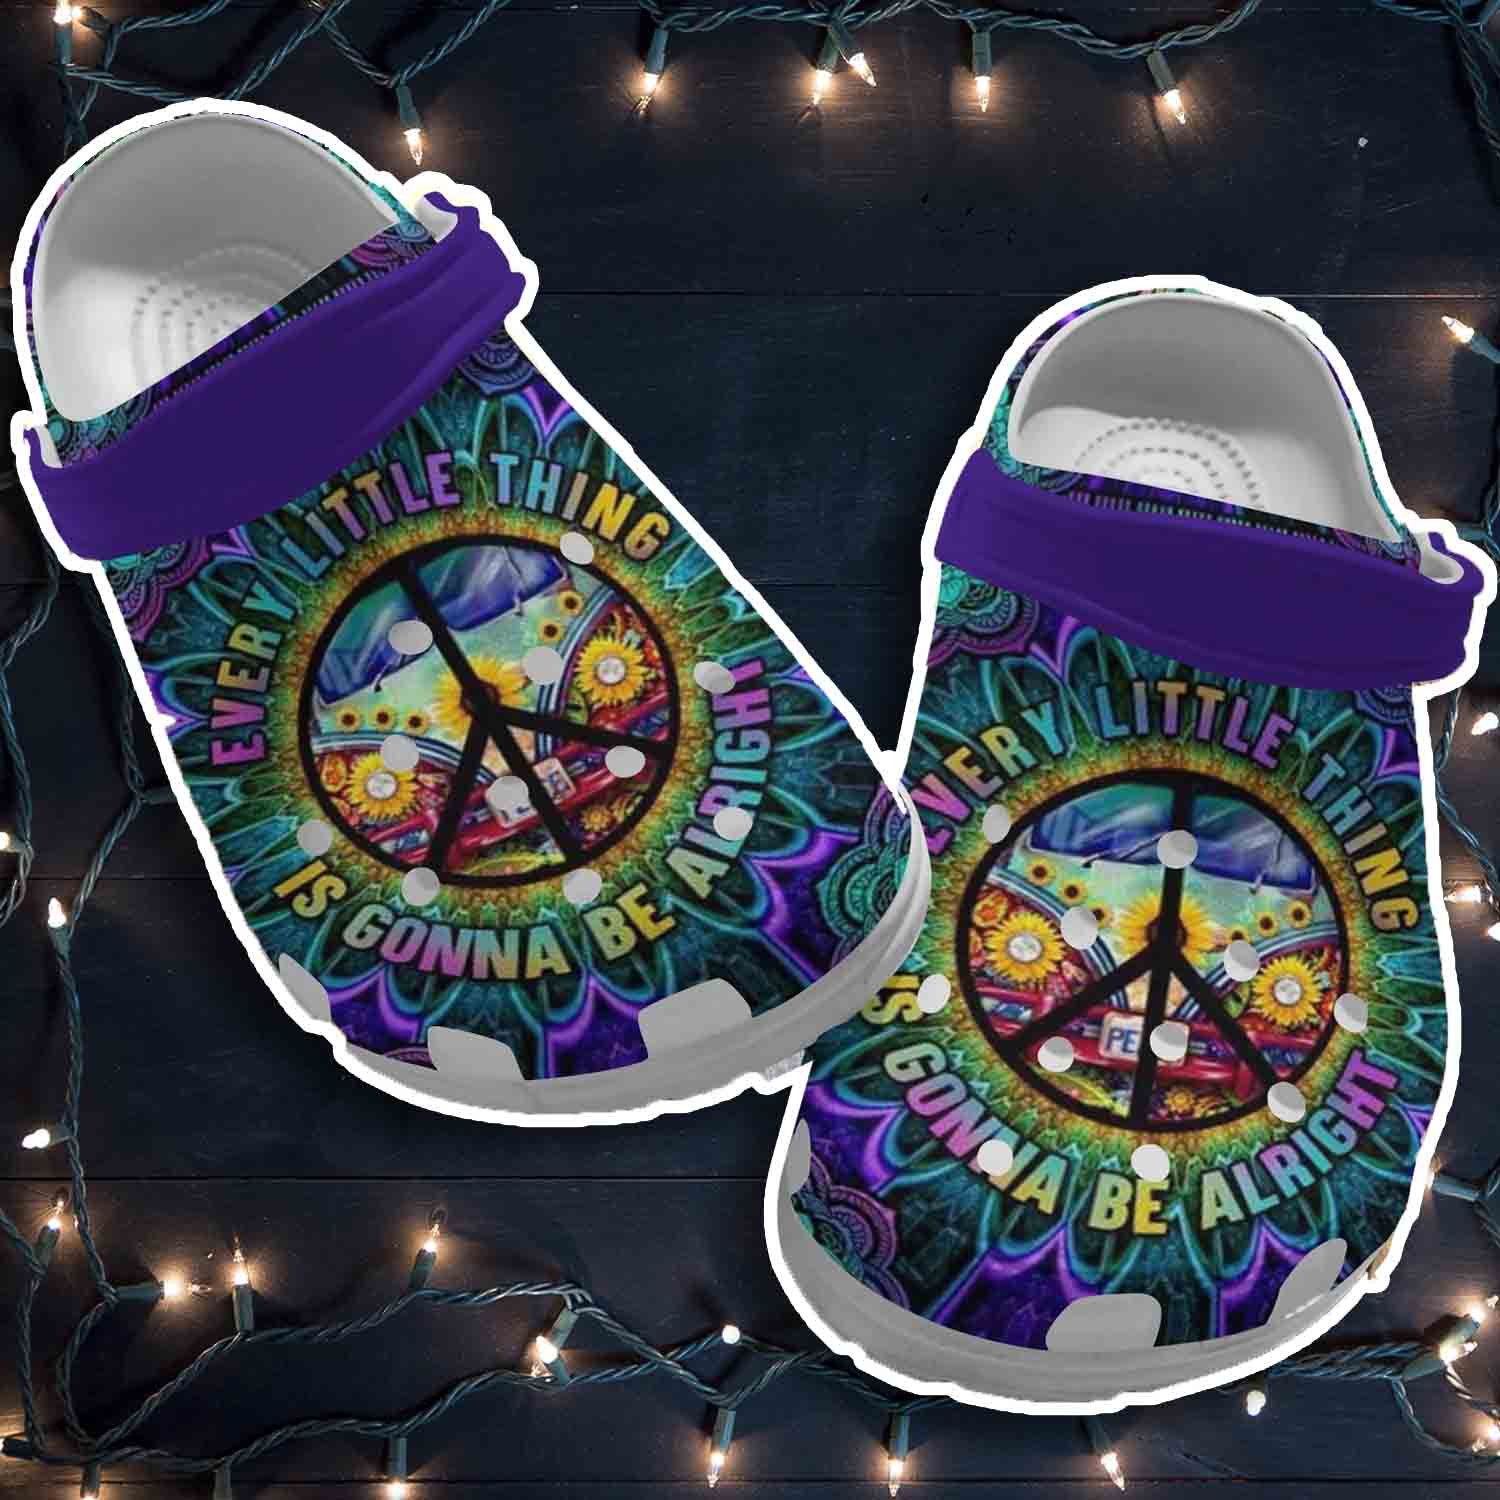 Hippie Bus Collection Crocs Shoes Clogs – Be Alright Crocs Shoes Clogs Gifts For Son Daughter